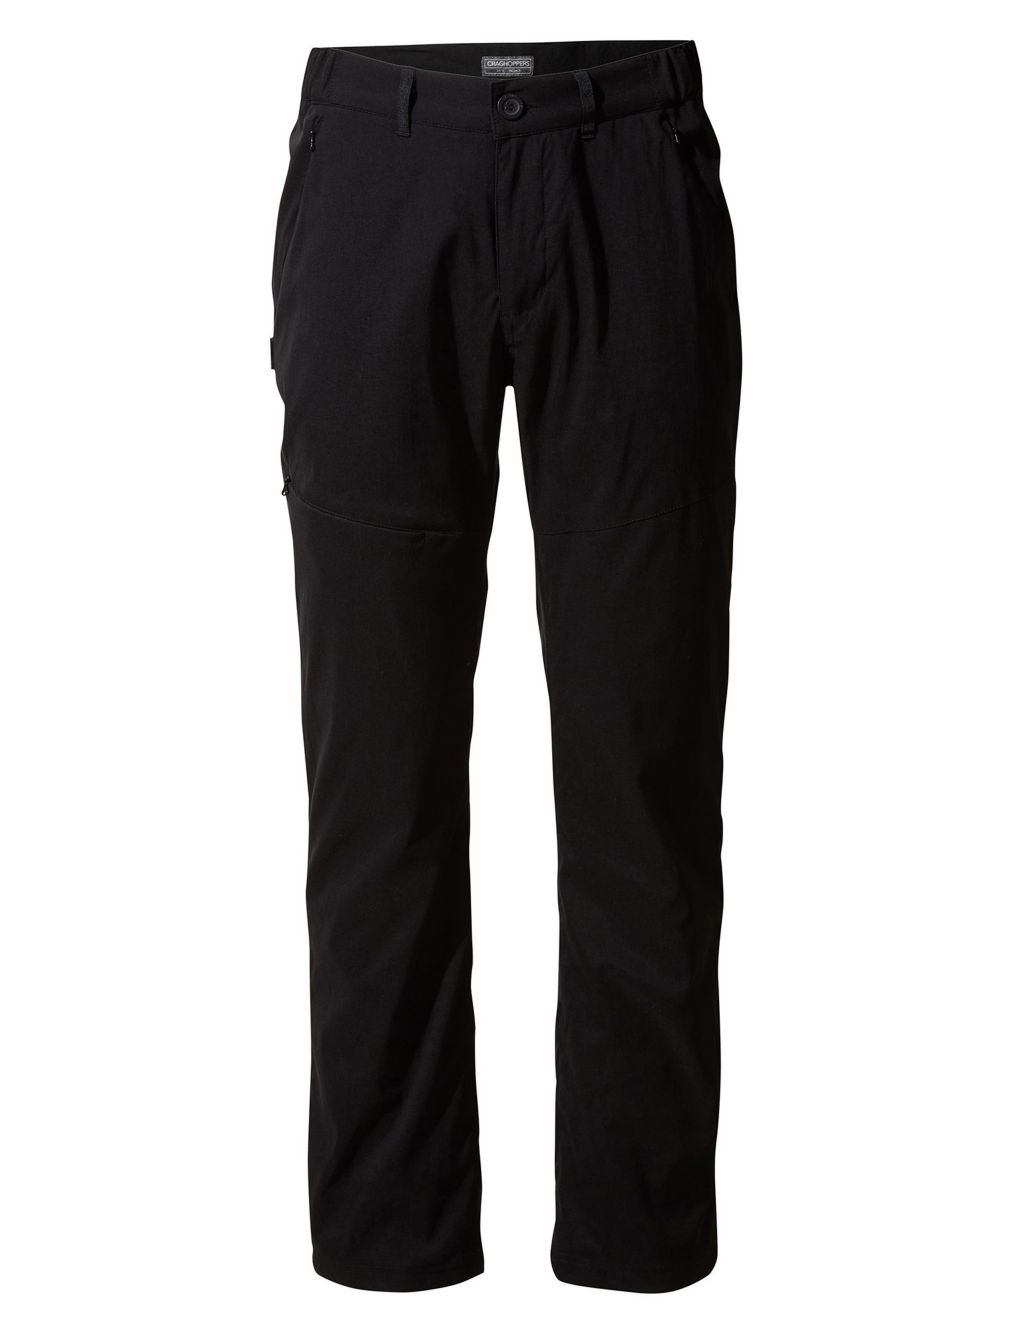 Kiwi Tailored Fit Trekking Trousers | Craghoppers | M&S